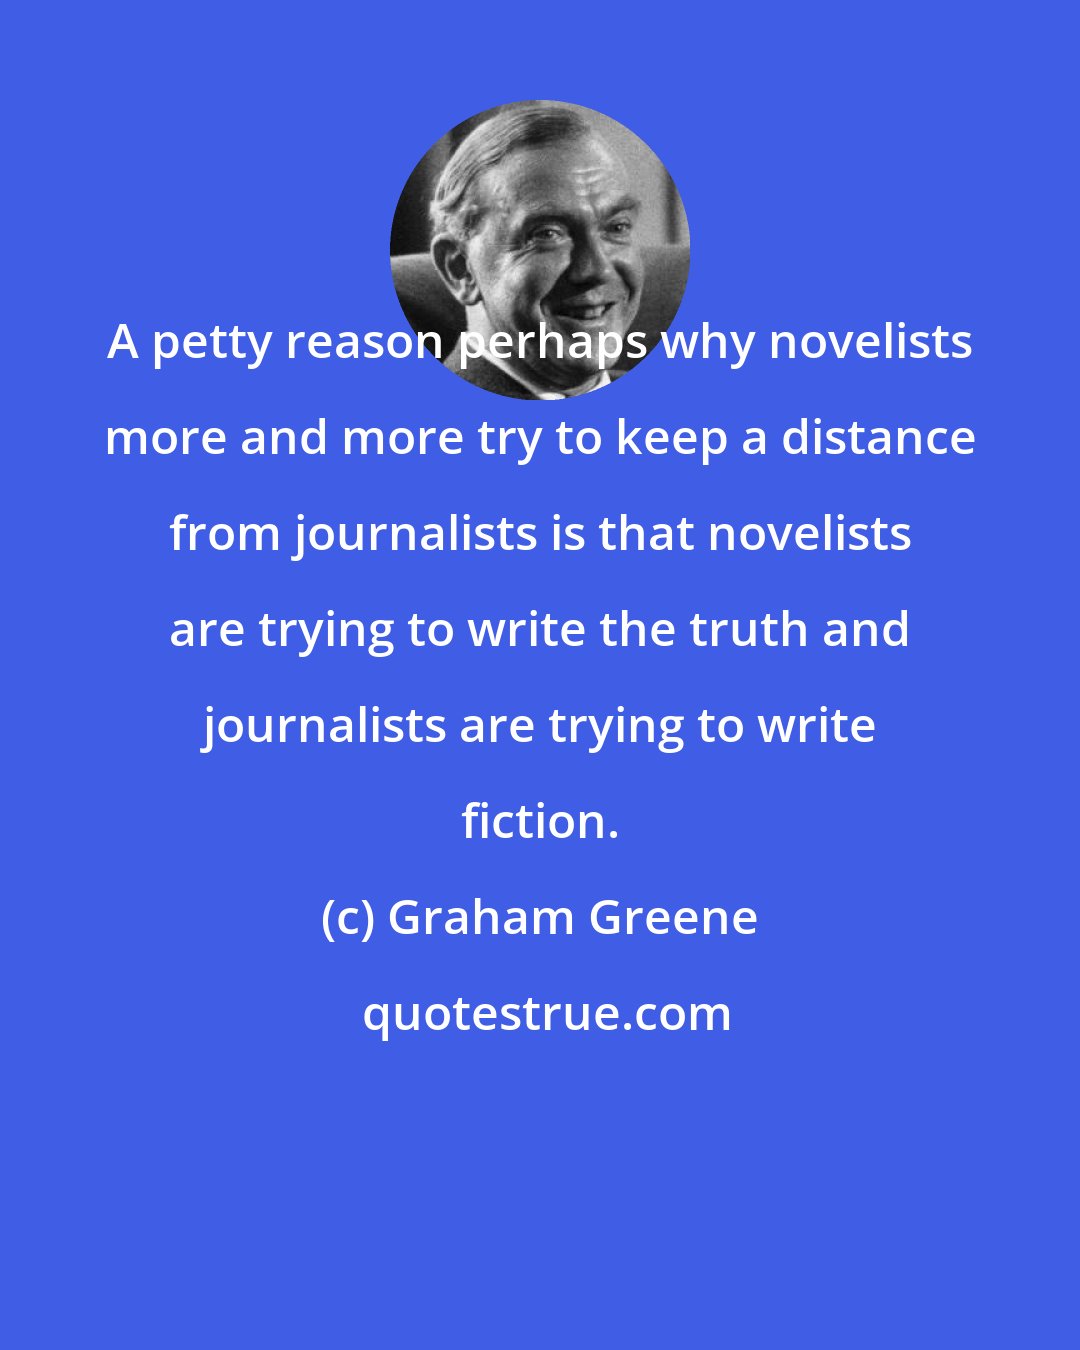 Graham Greene: A petty reason perhaps why novelists more and more try to keep a distance from journalists is that novelists are trying to write the truth and journalists are trying to write fiction.